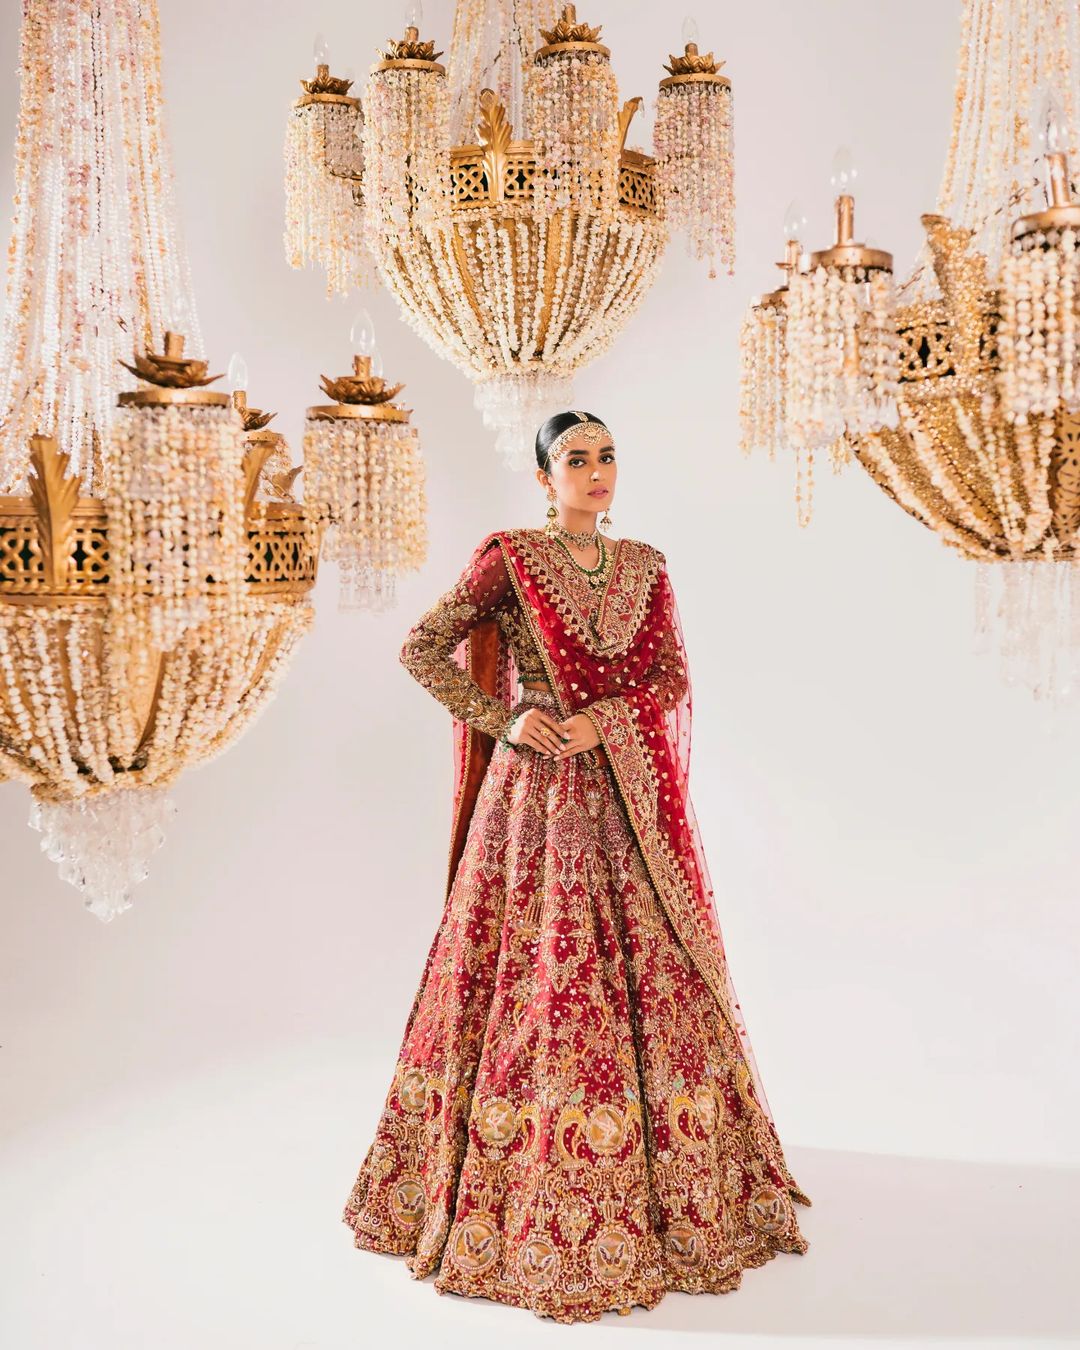 A Royal Destination Wedding With The Bride In A Stunning Red & White Lehenga  | Indian bride outfits, Indian bridal fashion, Indian bridal